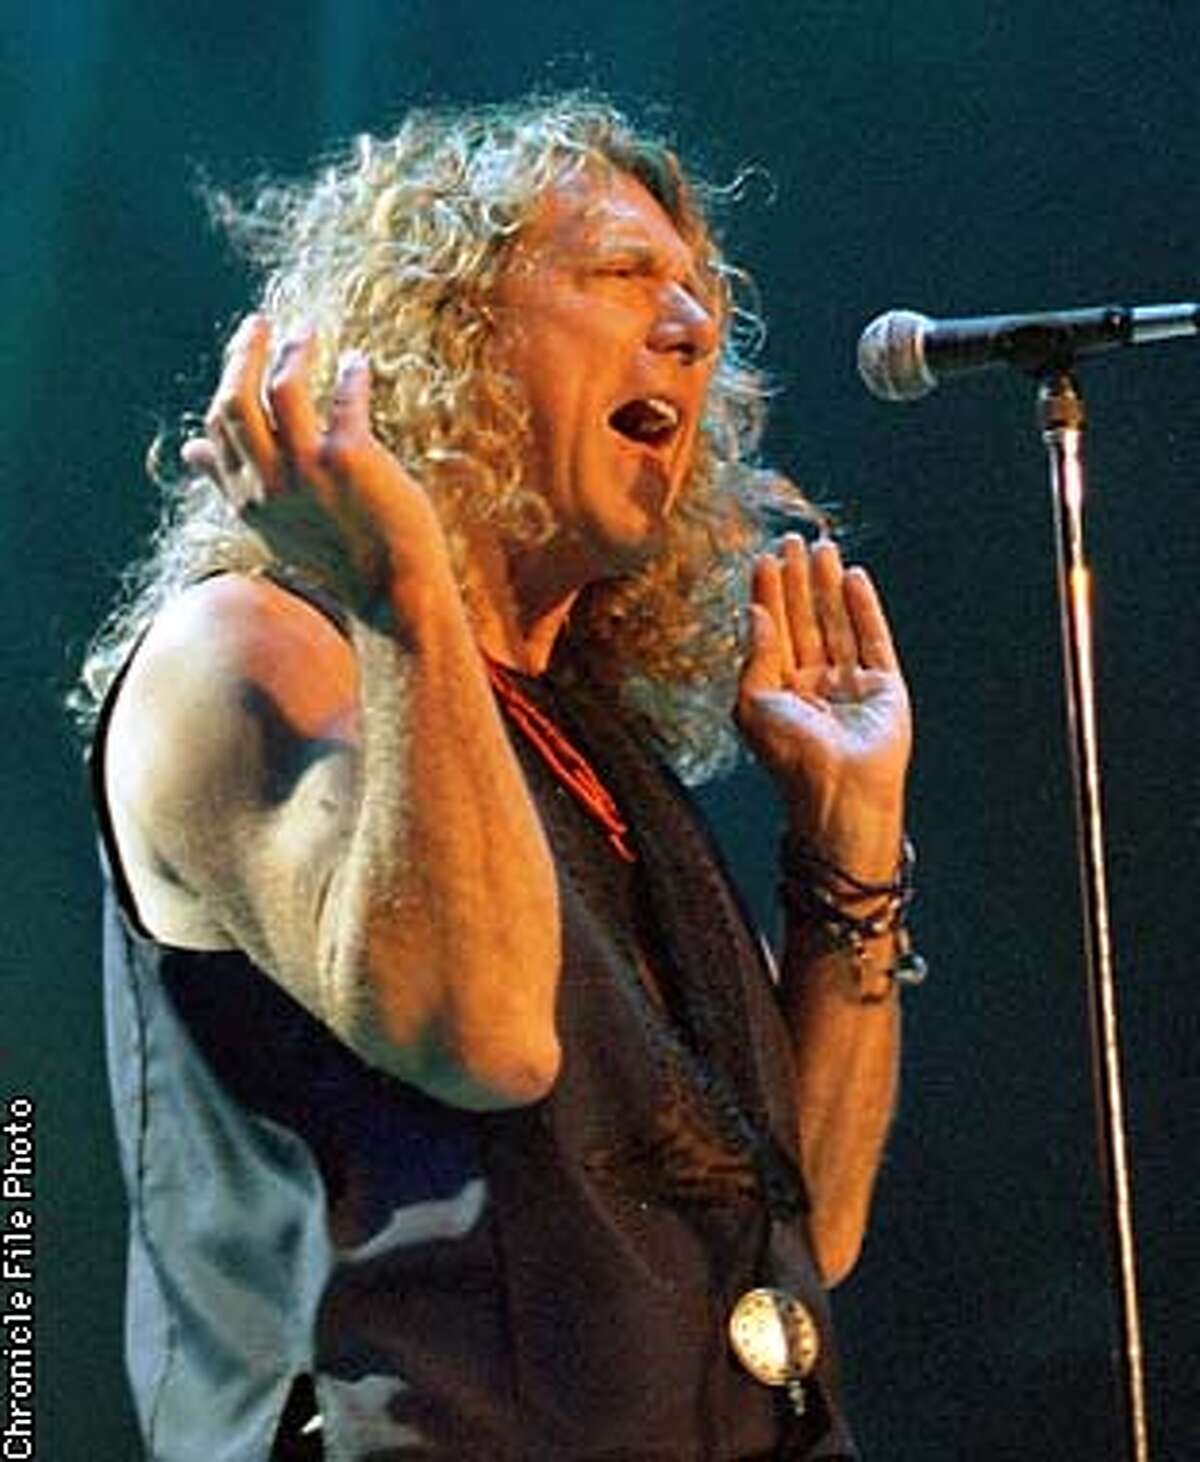 Former vocalist of Led Zeppelin Robert Plant during his concert with guitarist Jimmy Page at the OAkland Coliseum, Friday May19,1995. Chronicle Photo By: Peter DaSilva